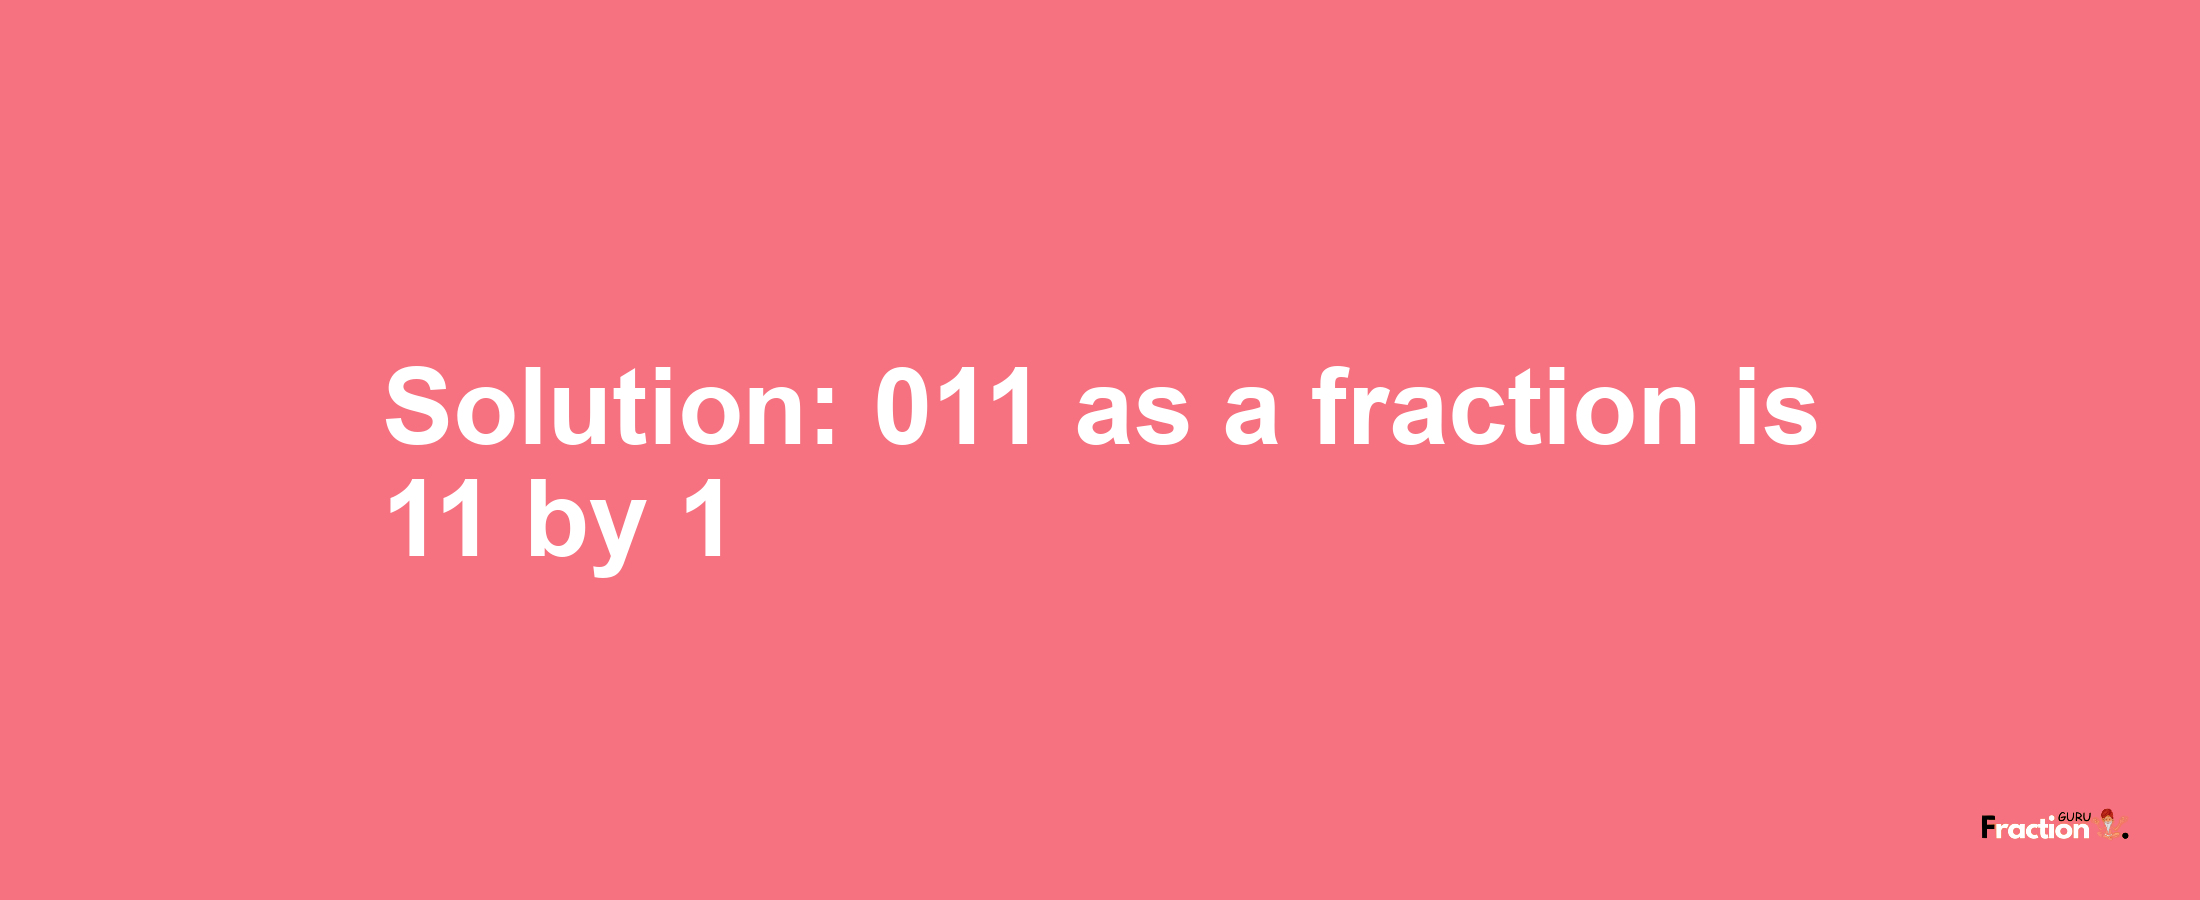 Solution:011 as a fraction is 11/1